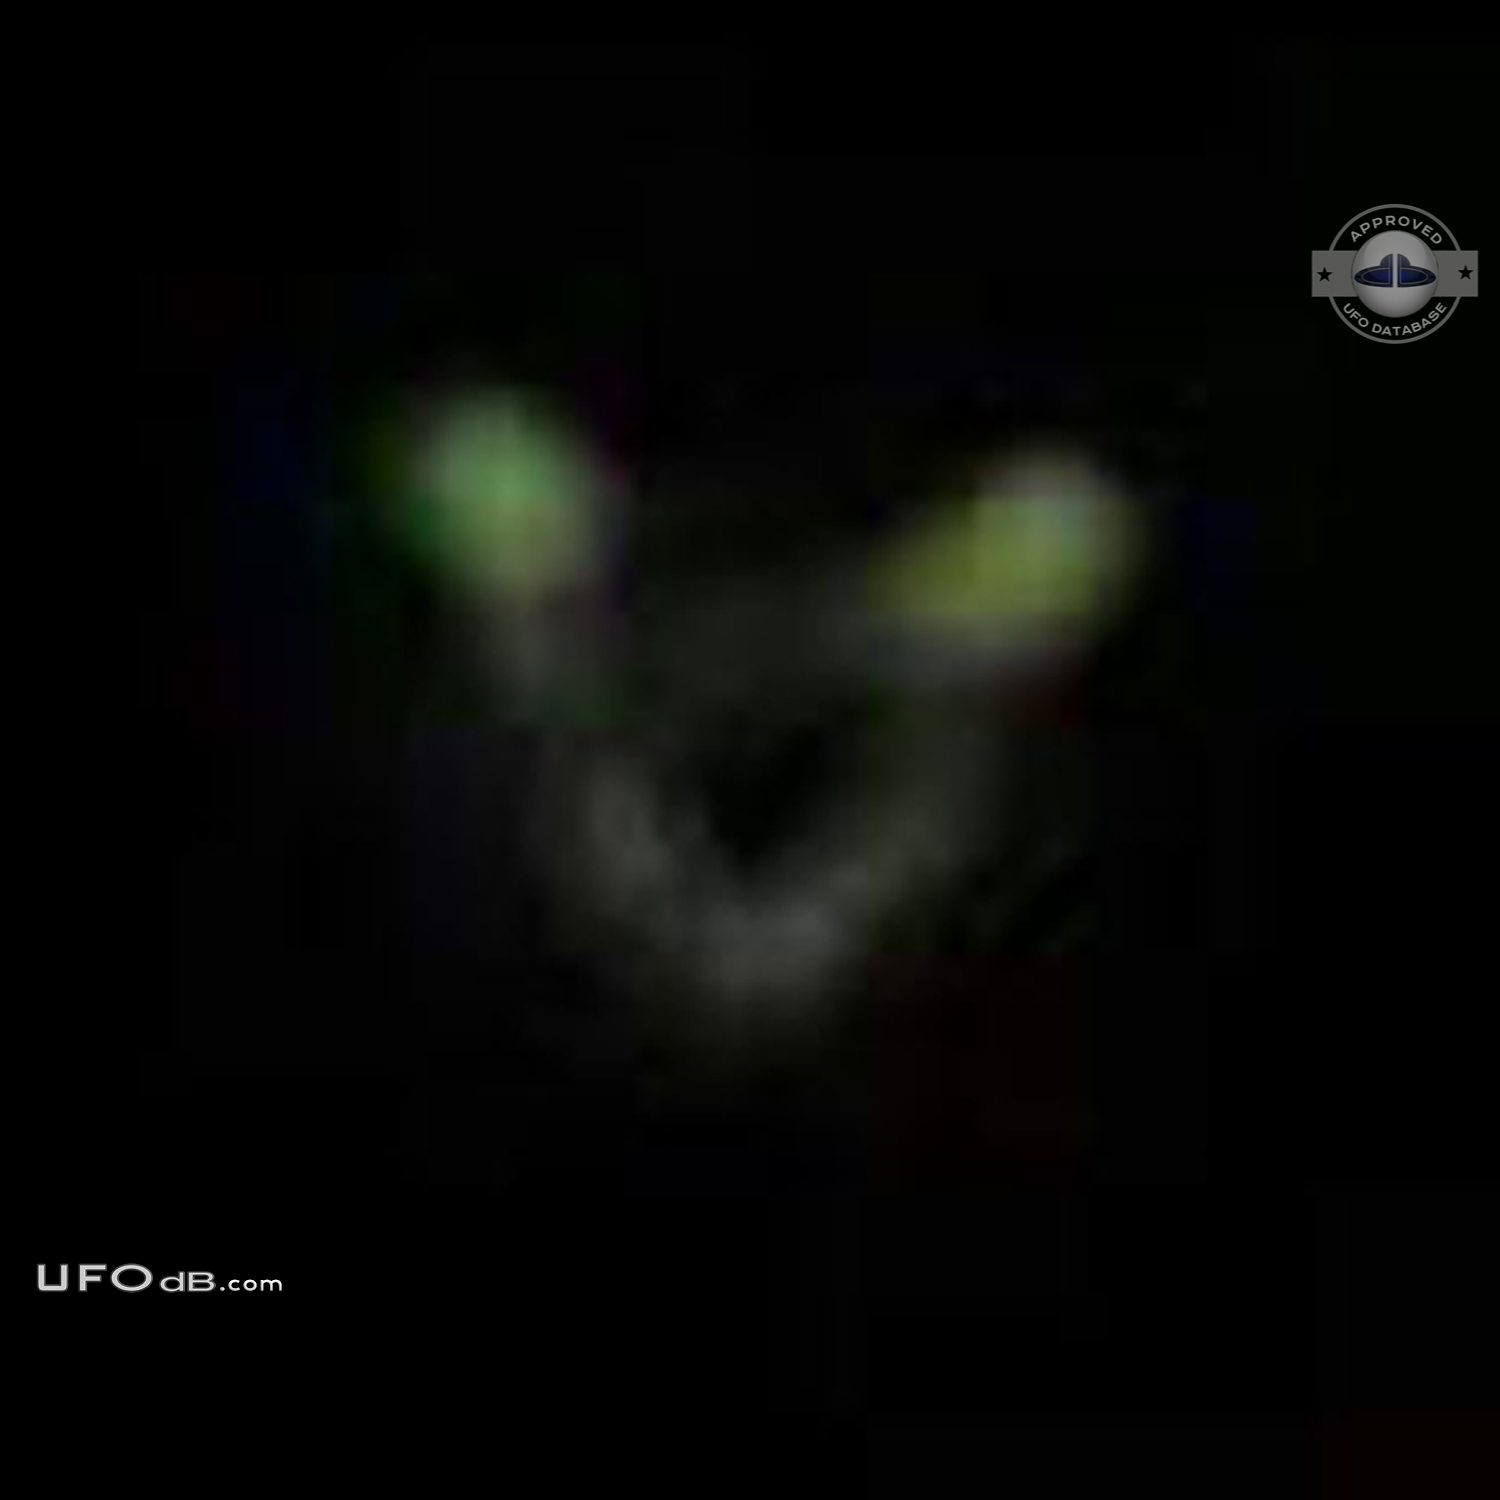 Silent UFO seen near woodland area Huddersfield UK on May 2011 UFO Picture #641-4